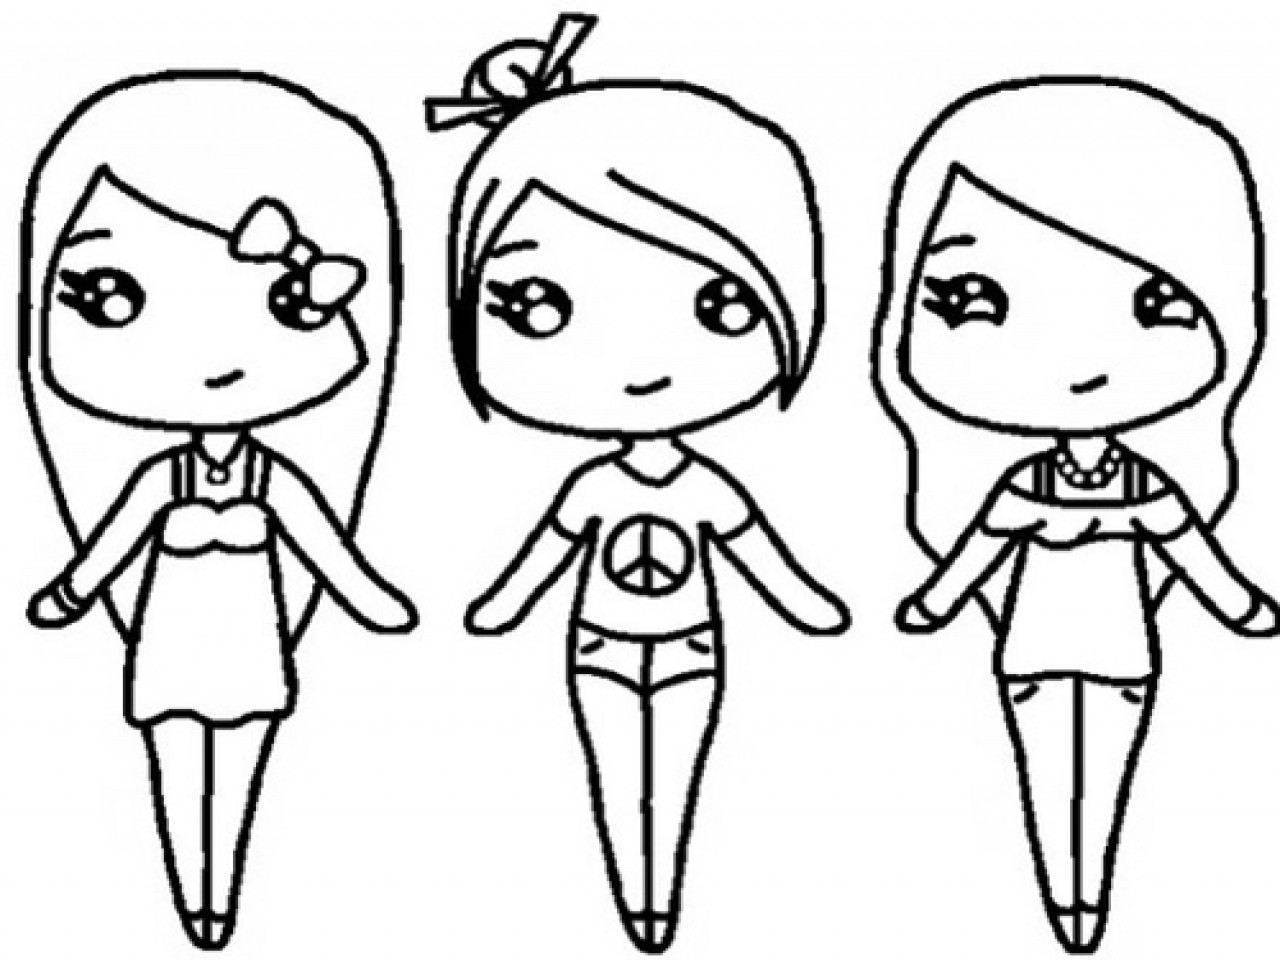 Bff Coloring Pages For Girls
 Bff Coloring Pages For Girls Best Friend Chibi Stencils